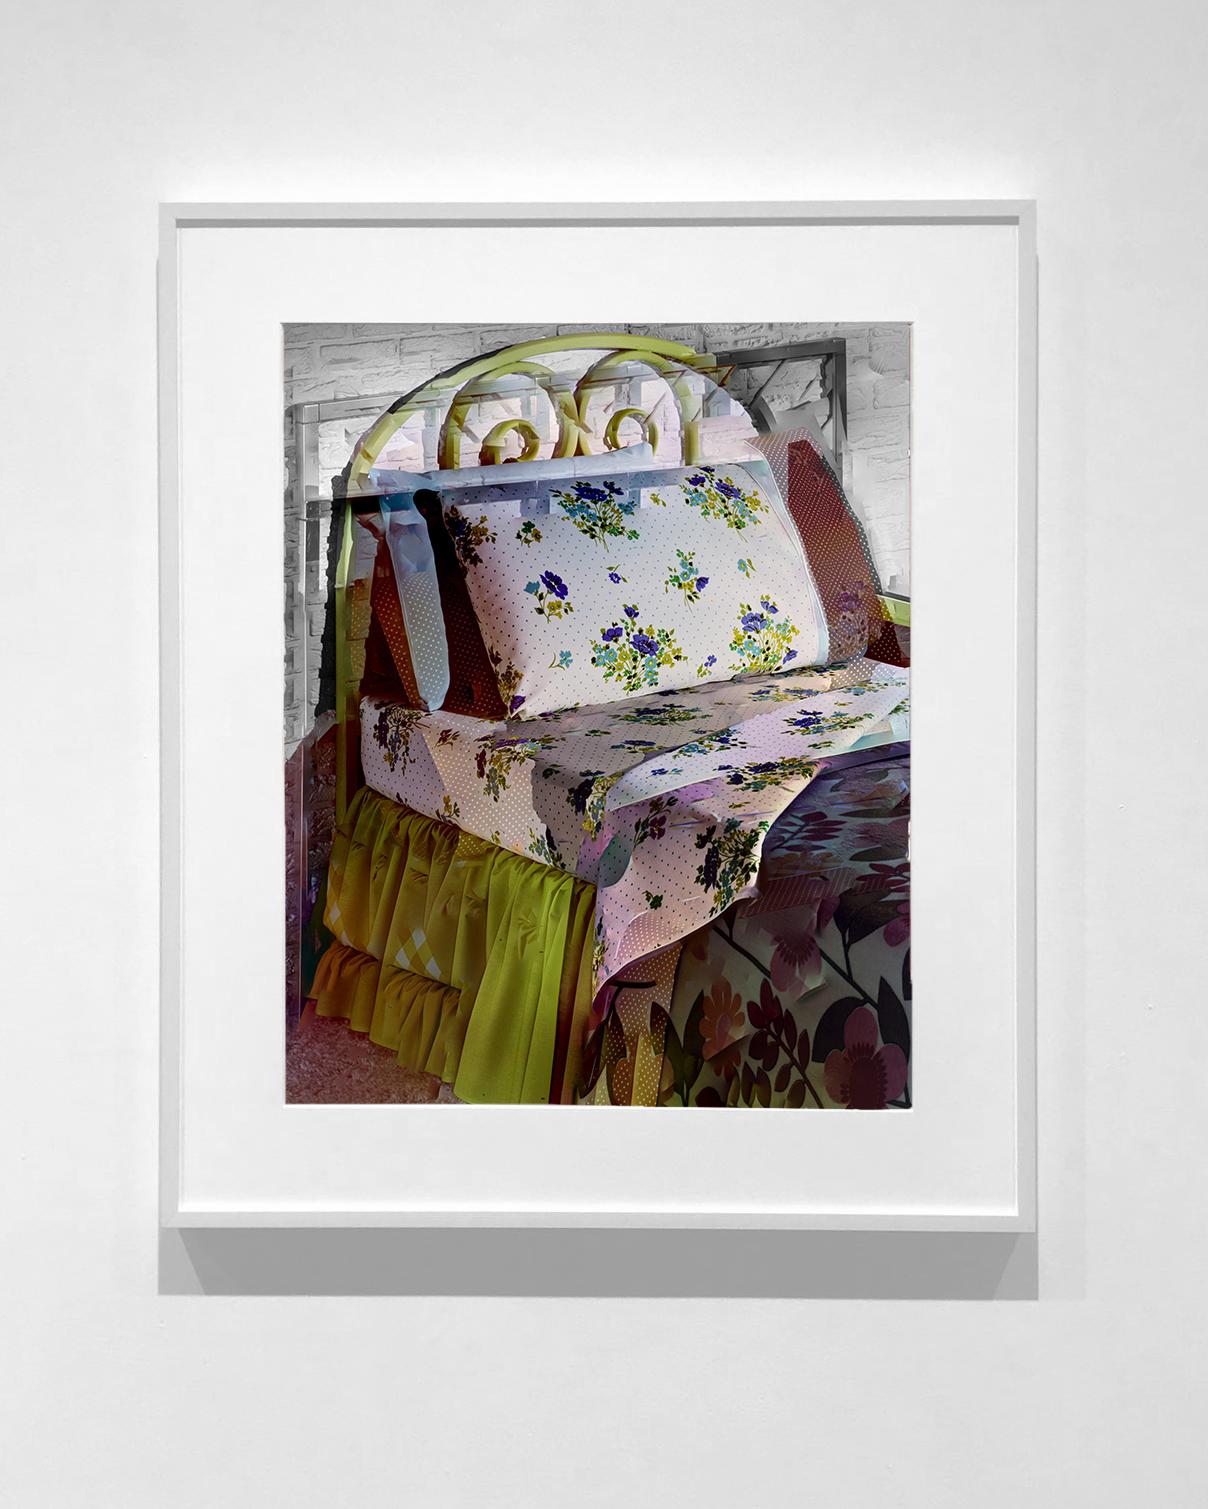 Dwelling #2, Contemporary Color Photography, 60 x 48 Inches - Black Still-Life Photograph by Matthew Cronin